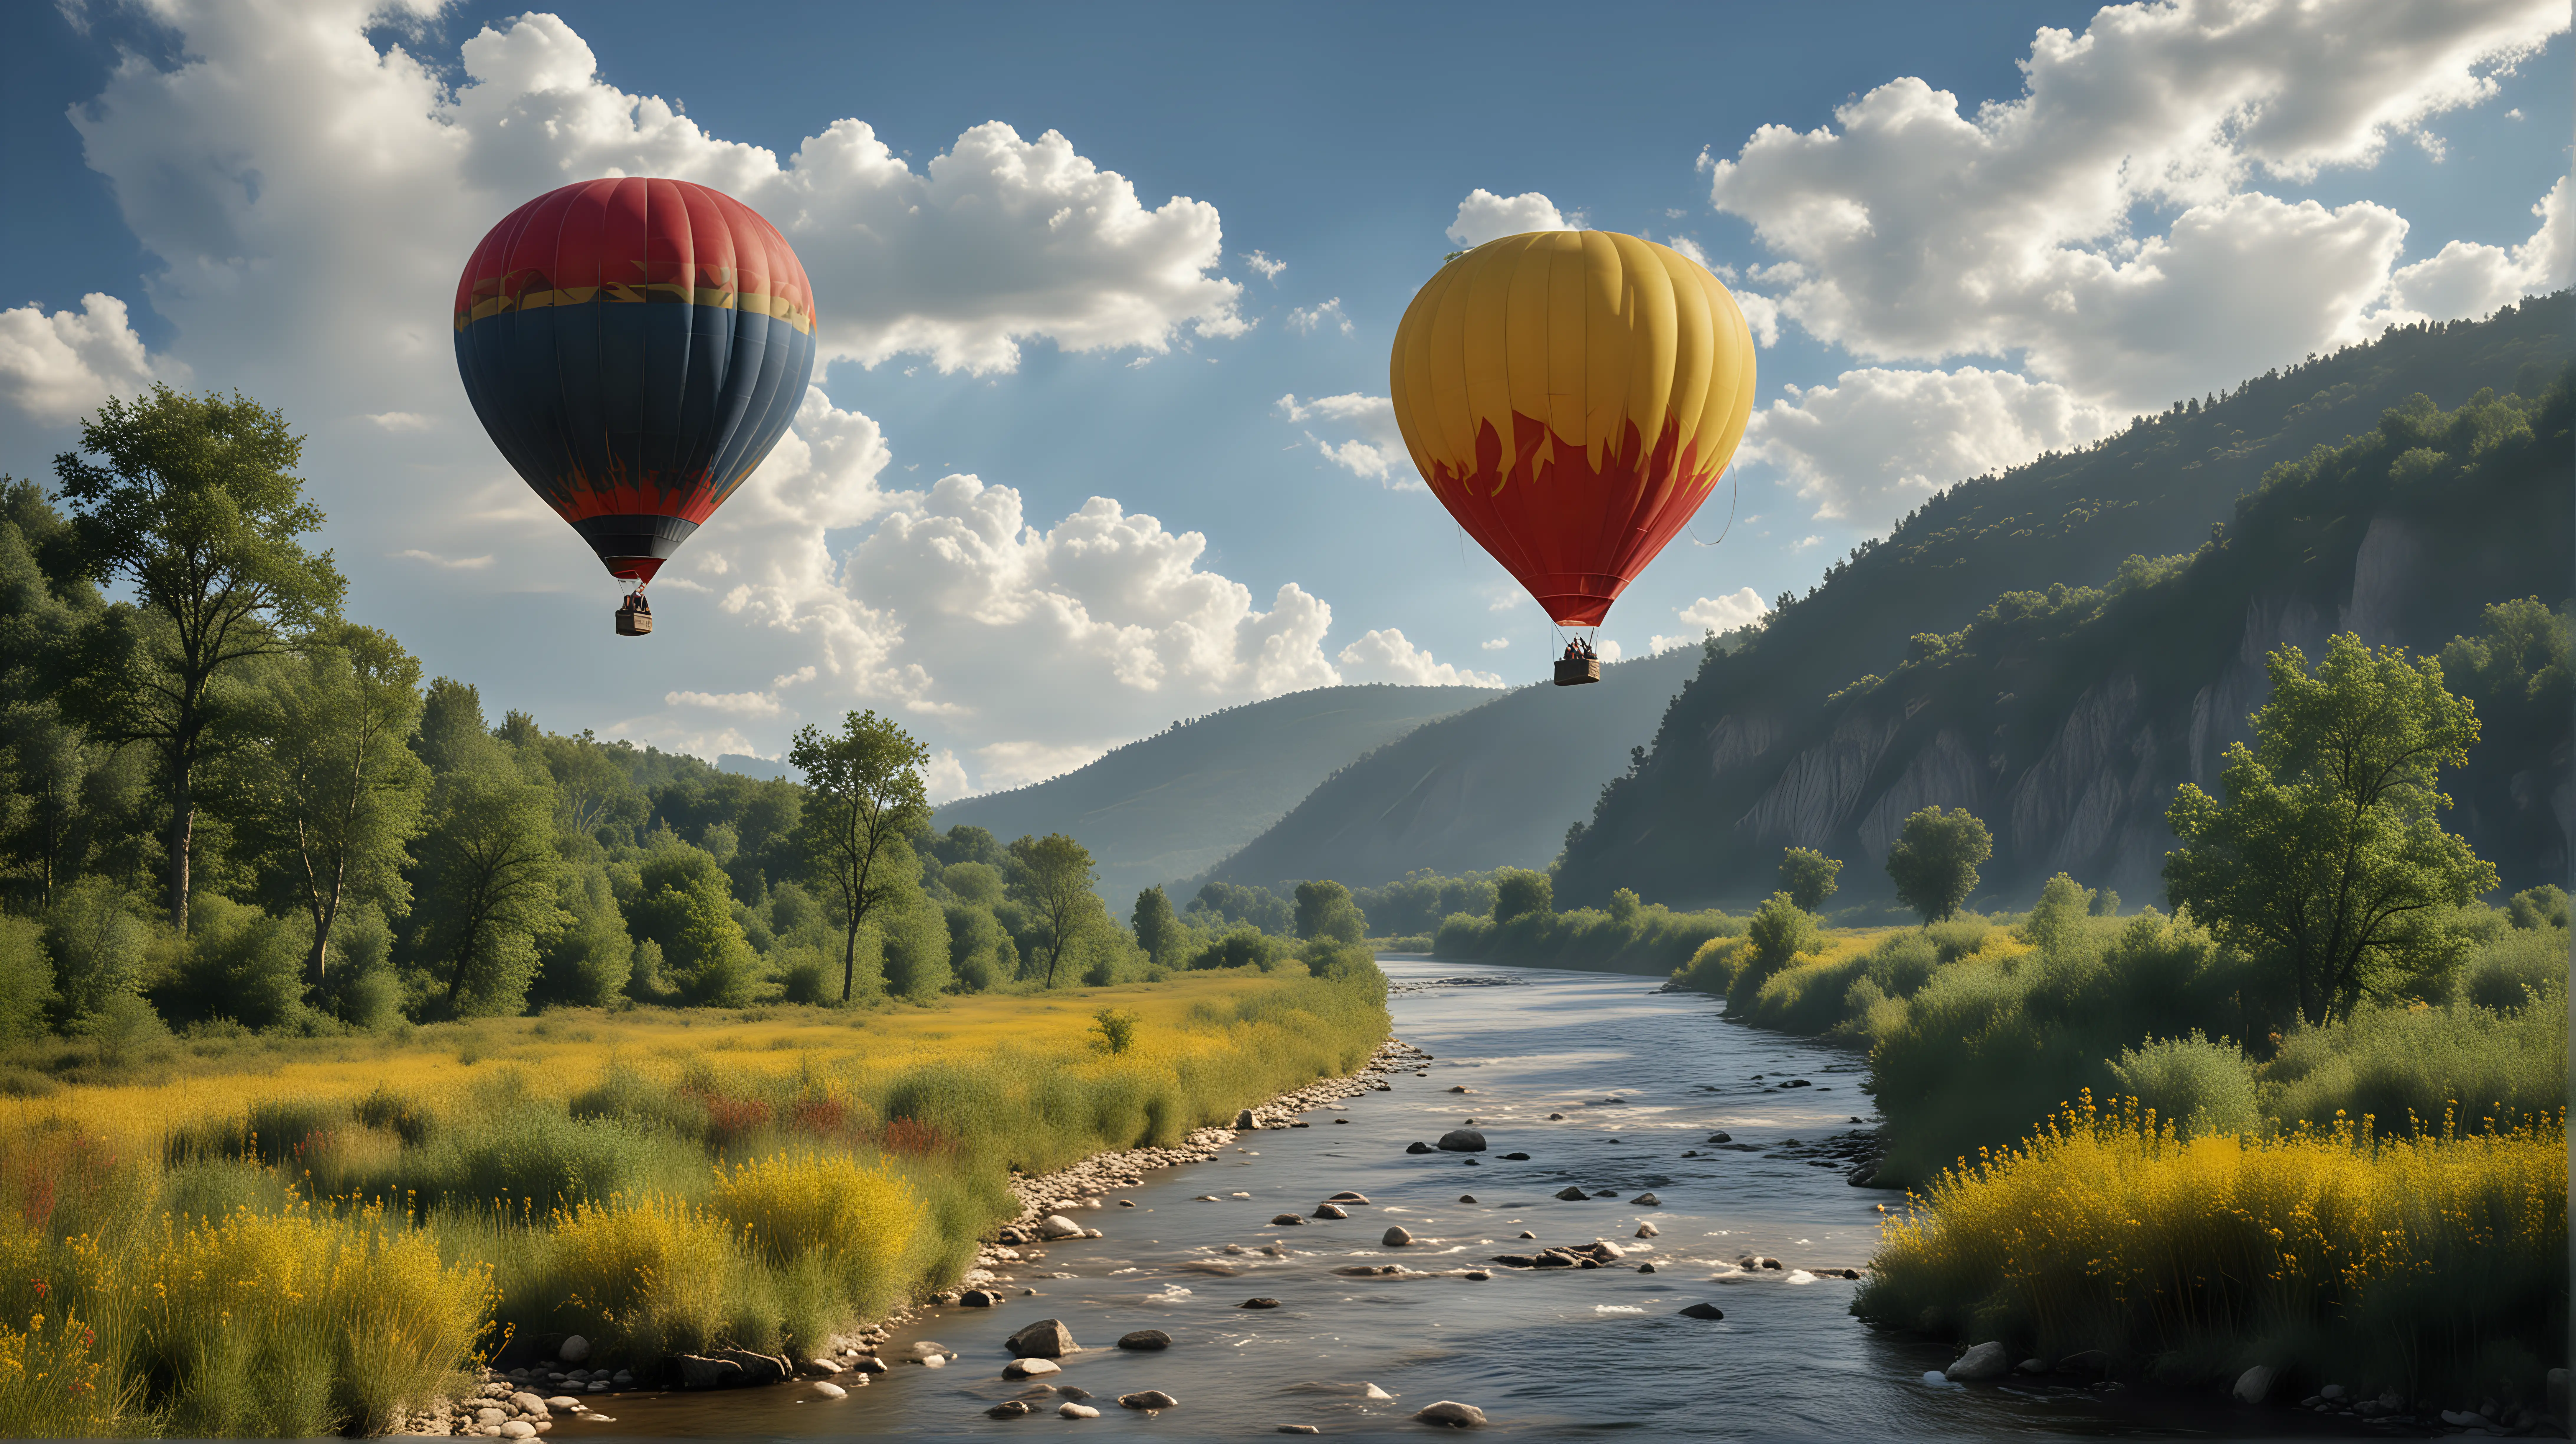 Colorful Hot Air Balloon Adventure Over Wild River